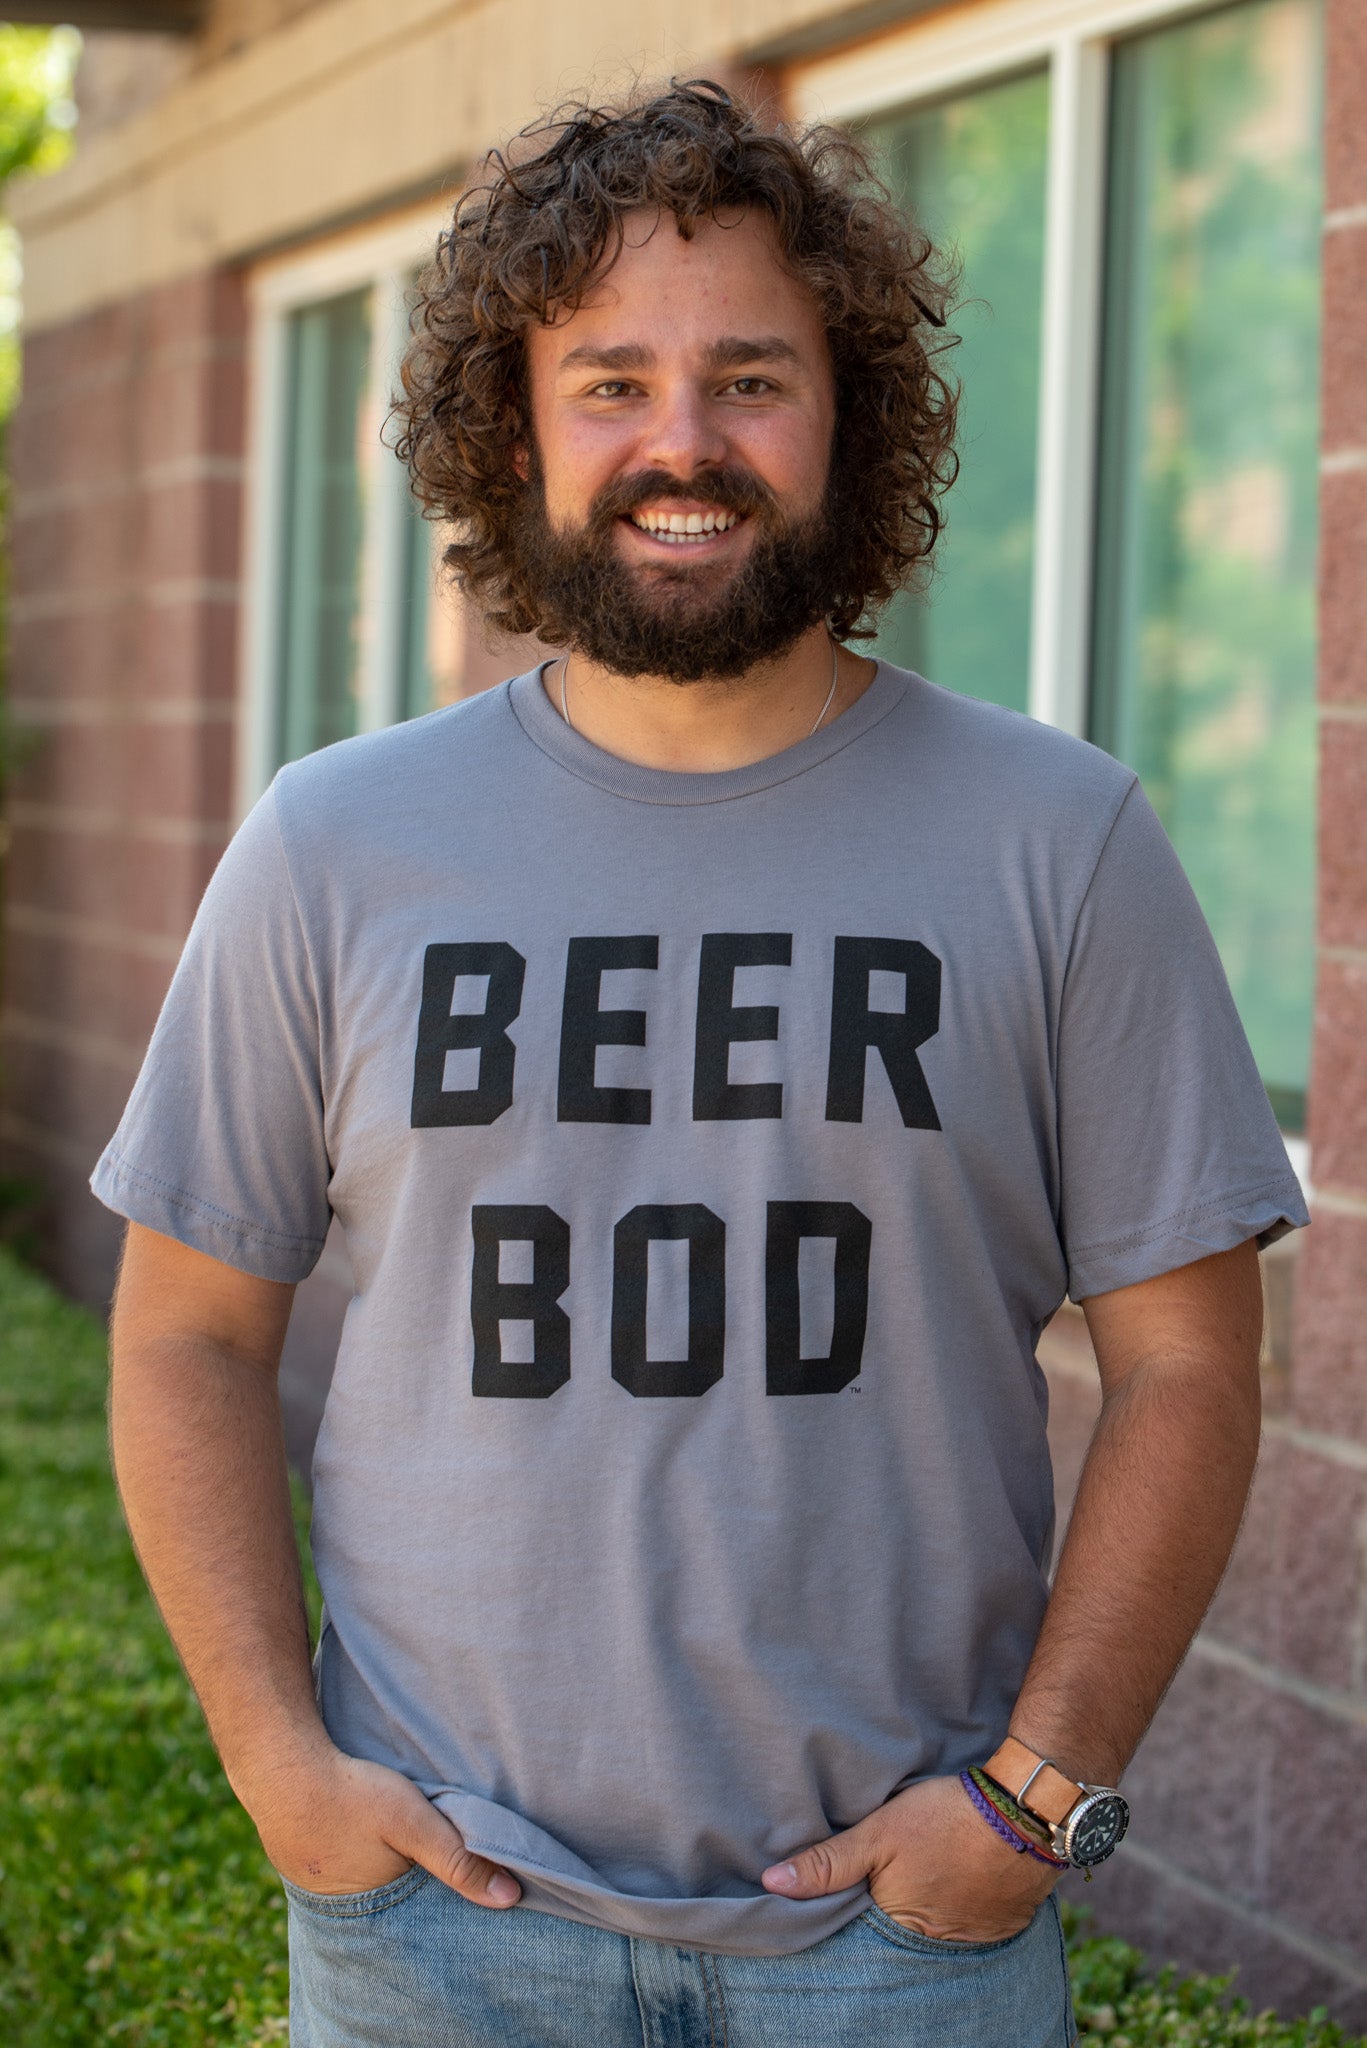 Beer Bod unisex short sleeve t-shirt storm grey - Cool T-shirts - Funny Graphic Tees for Dad at Lush Fashion Lounge Boutique in Oklahoma City